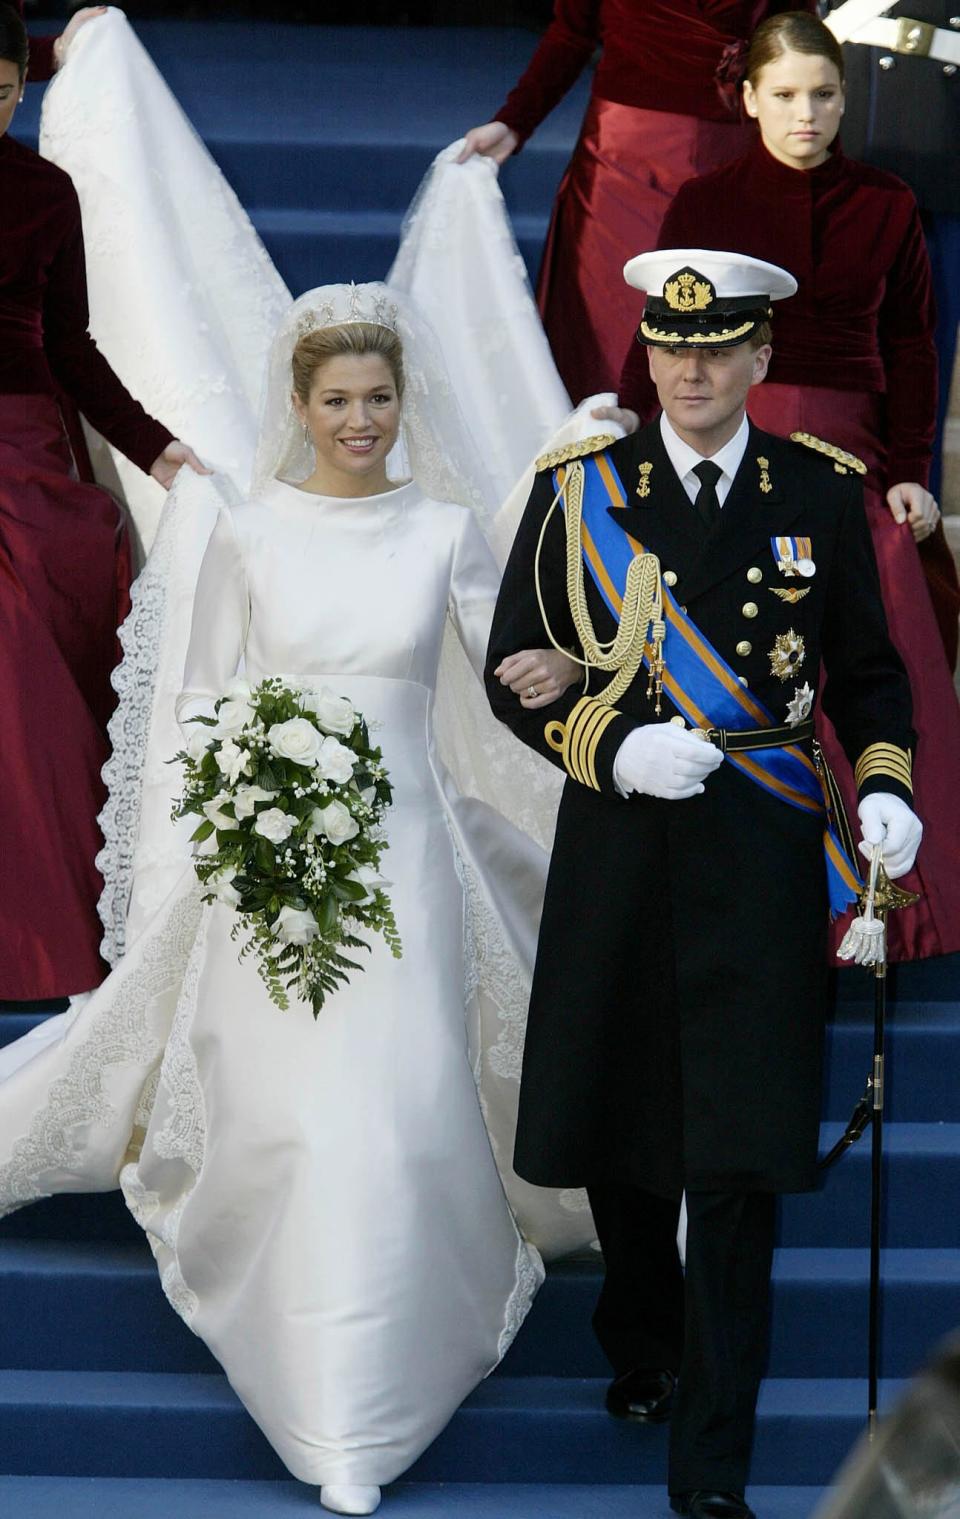 Princess Maxima and Prince Willem-Alexander of the Netherlands on their wedding day